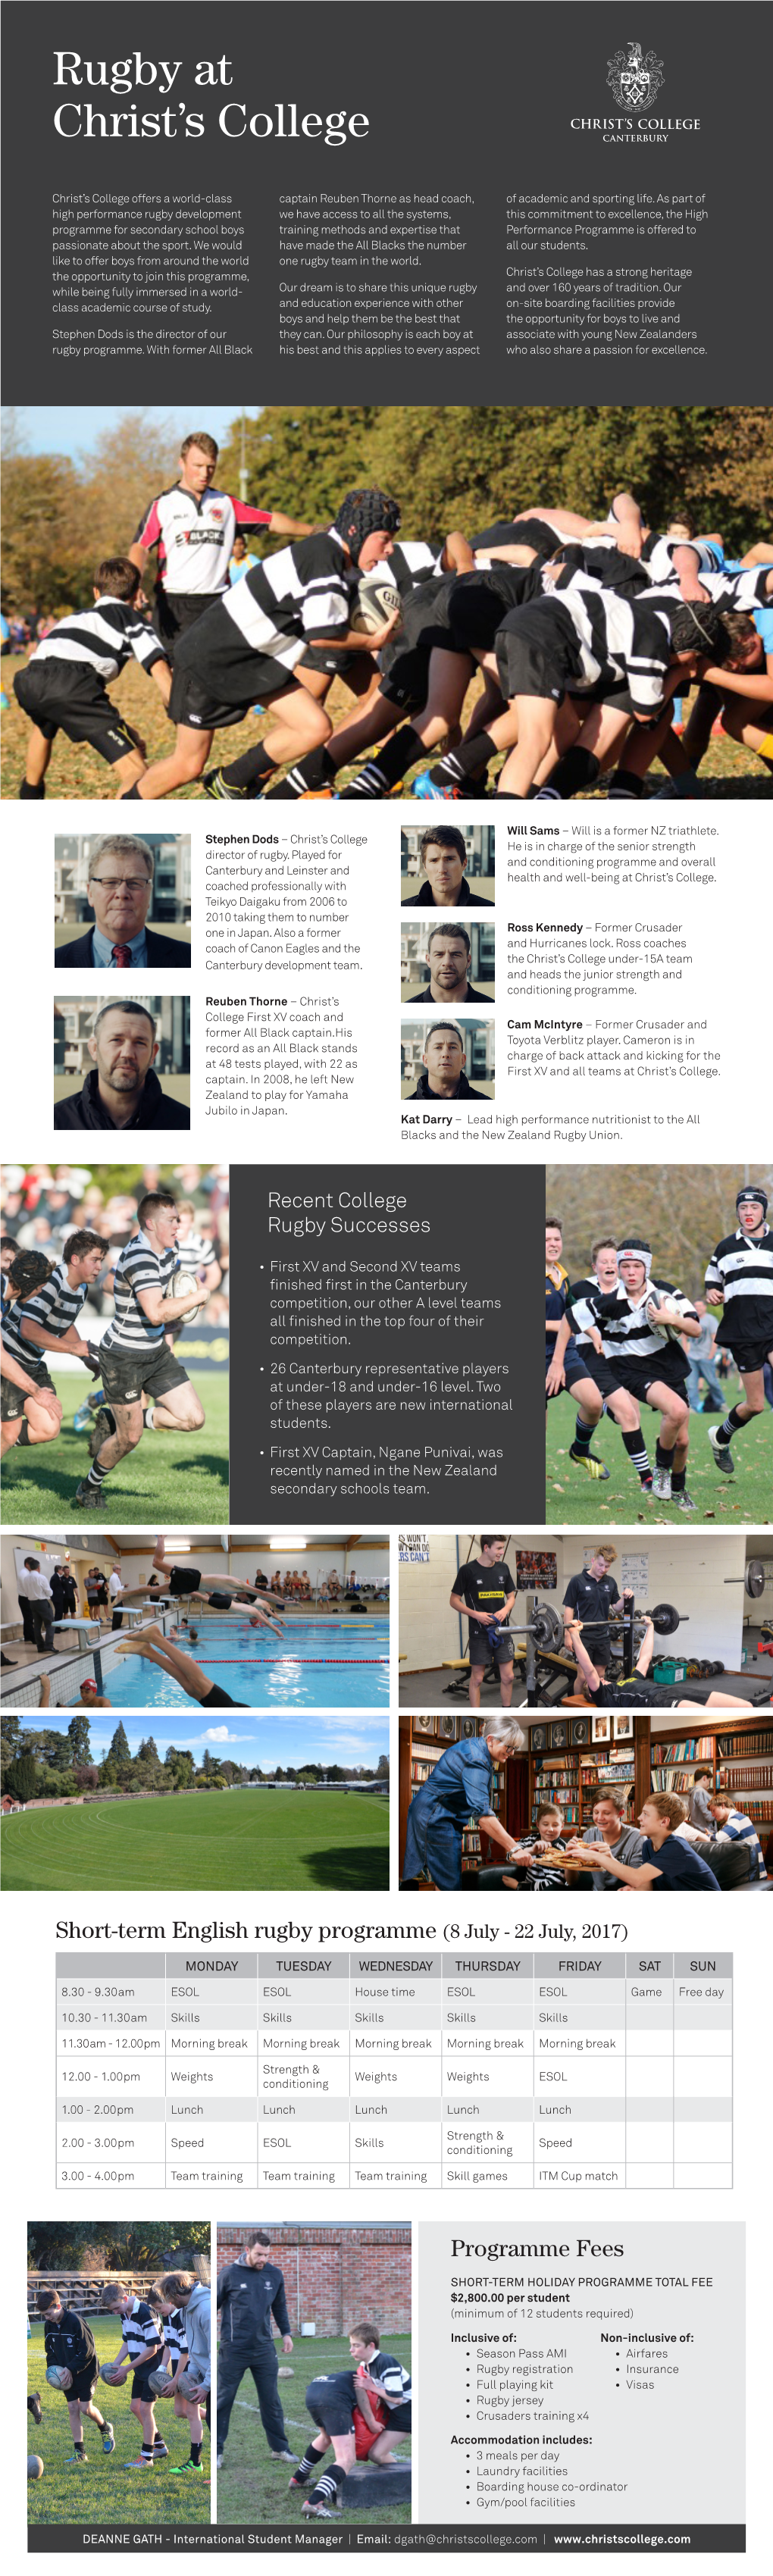 Rugby at Christ's College